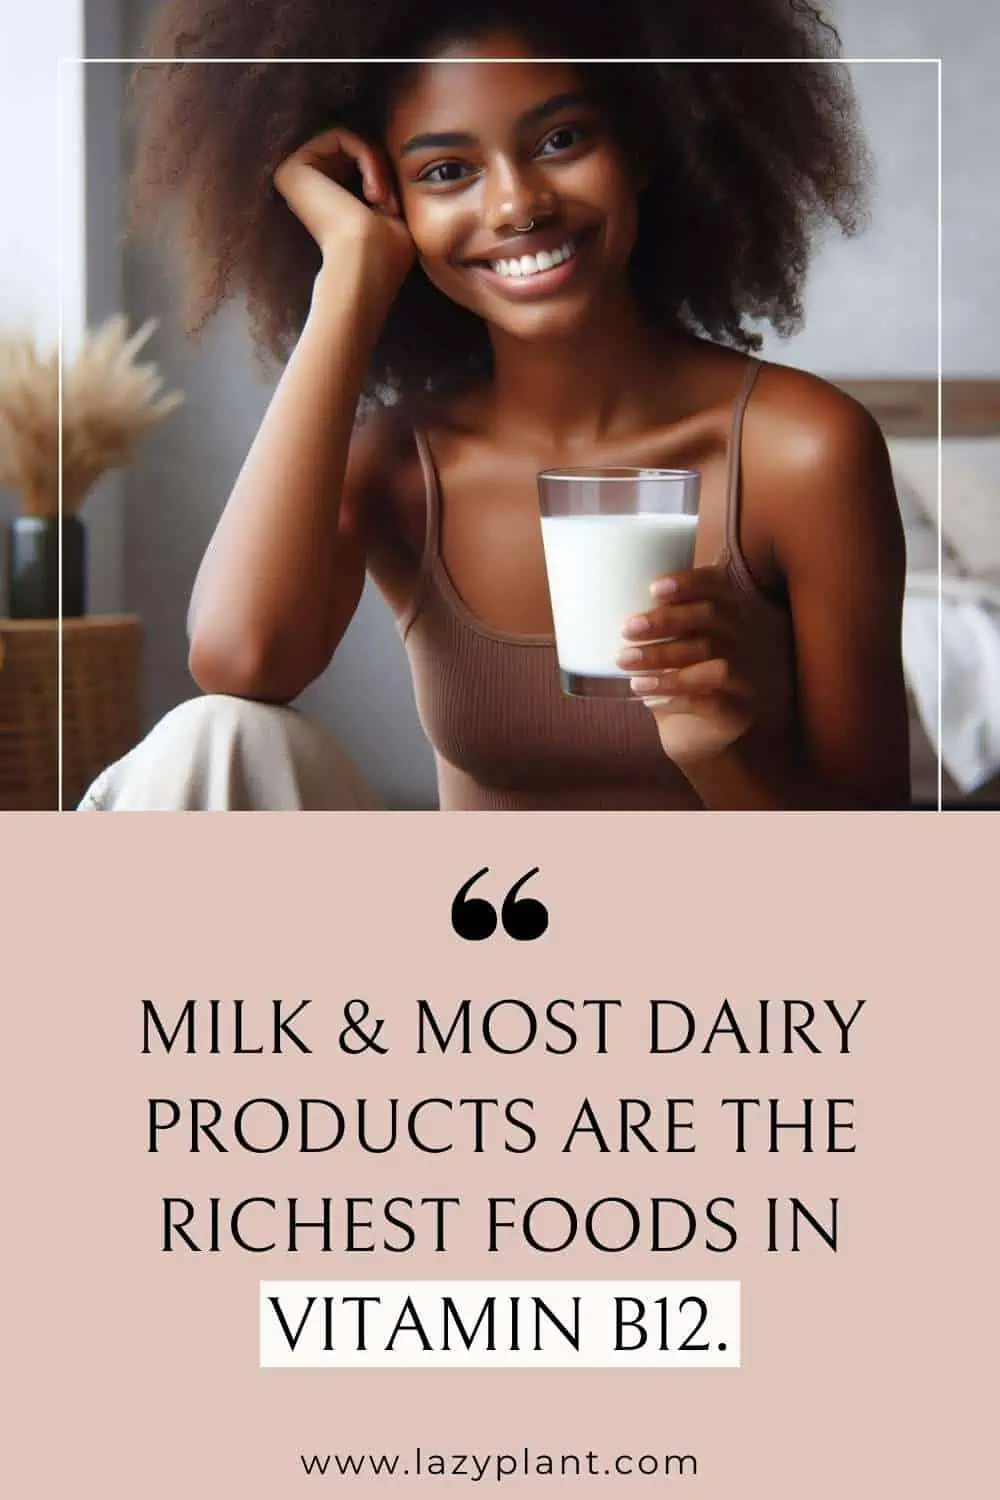 Milk and dairy products are excellent natural sources of Vitamin B12.